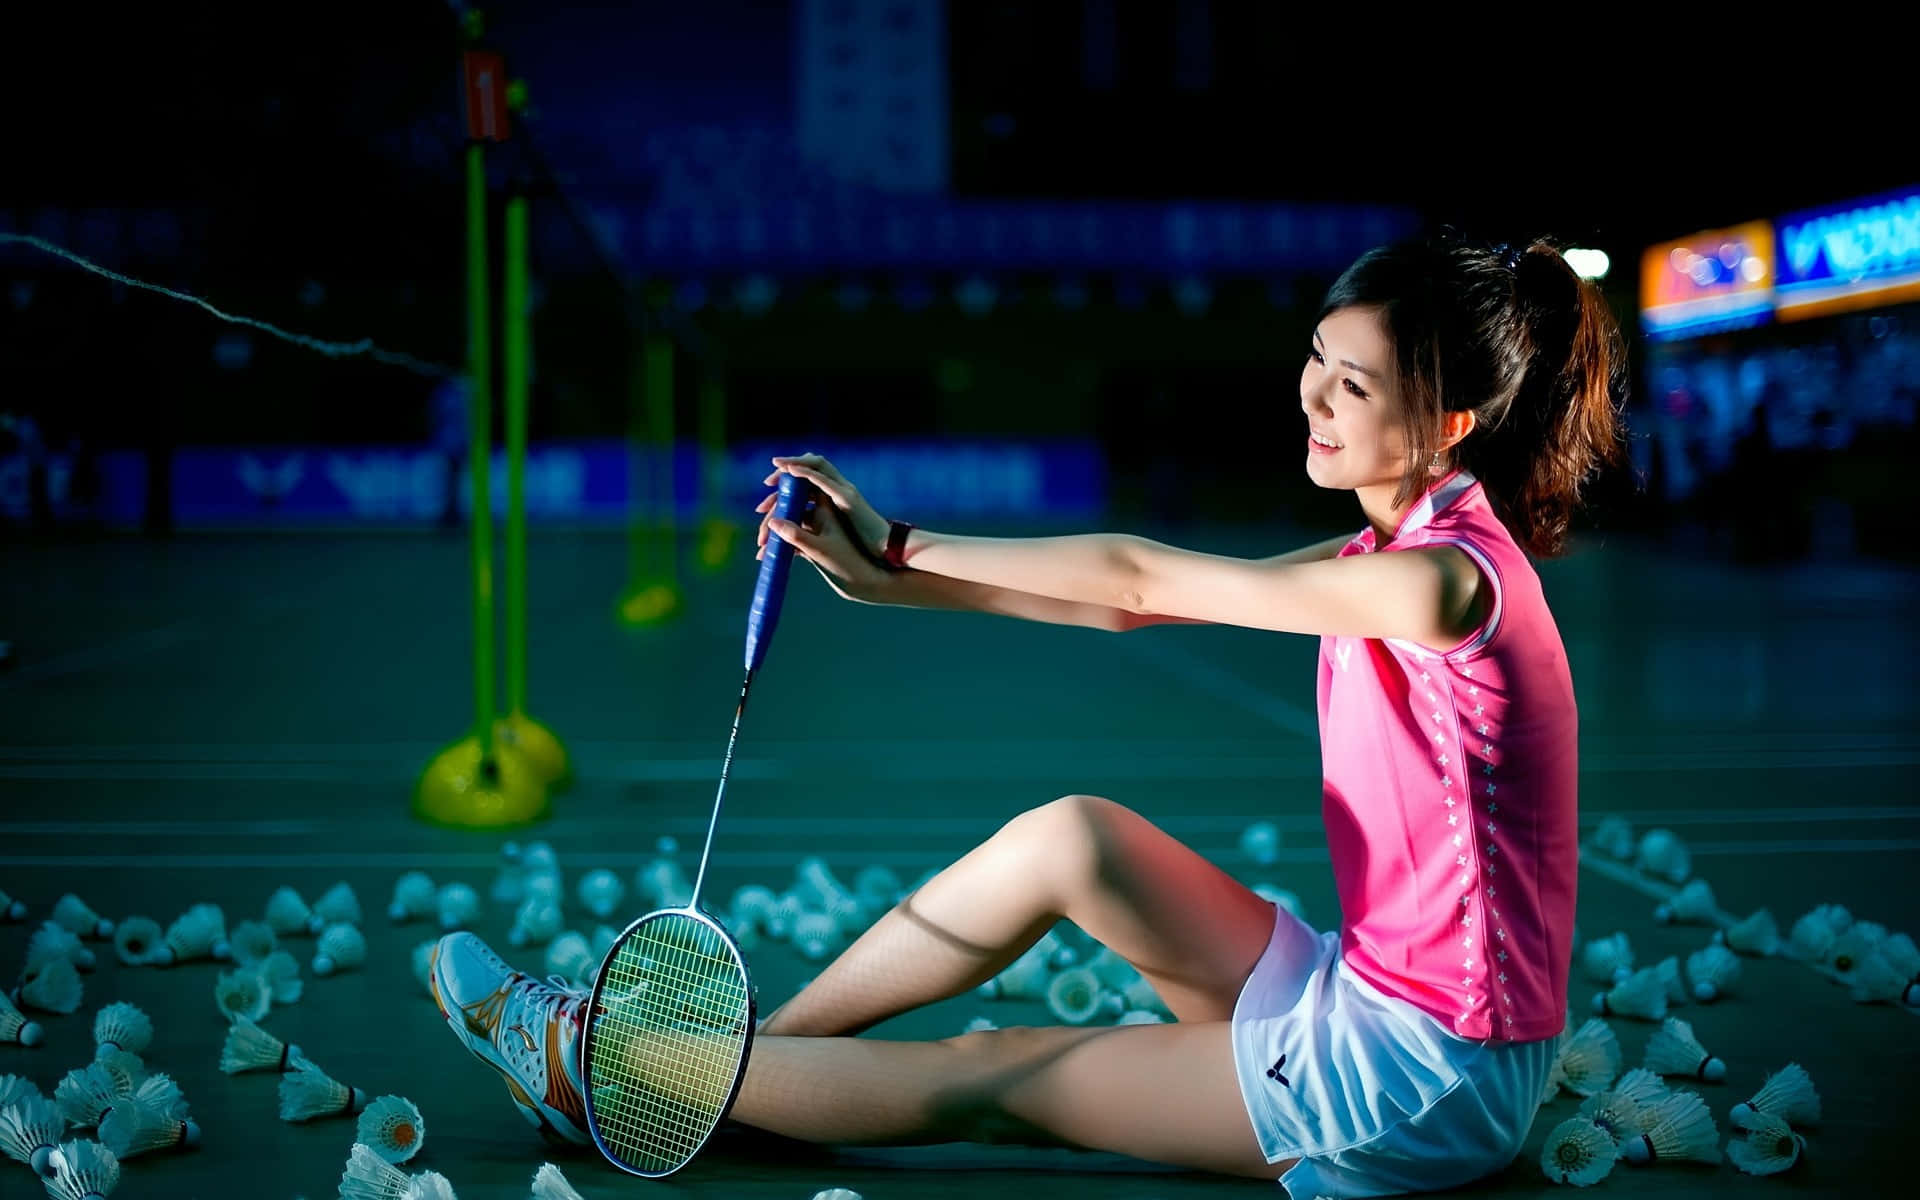 "Level up your badminton game with these HD court and equipment visuals"